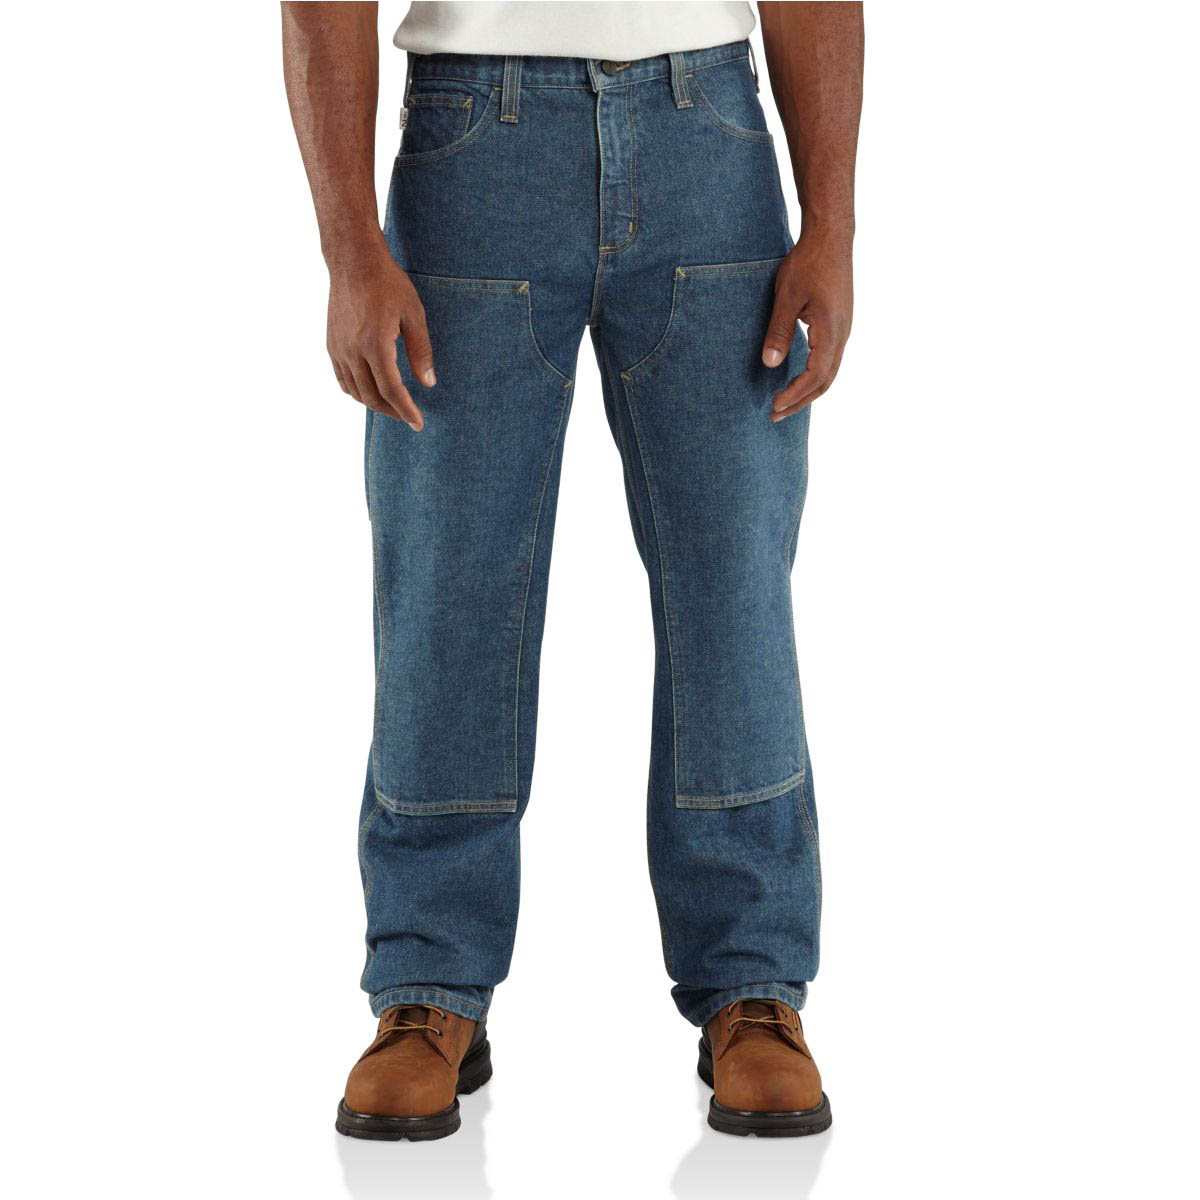 Carhartt Men's Flame Resistant Utility Denim Double Front Jean Relaxed Fit